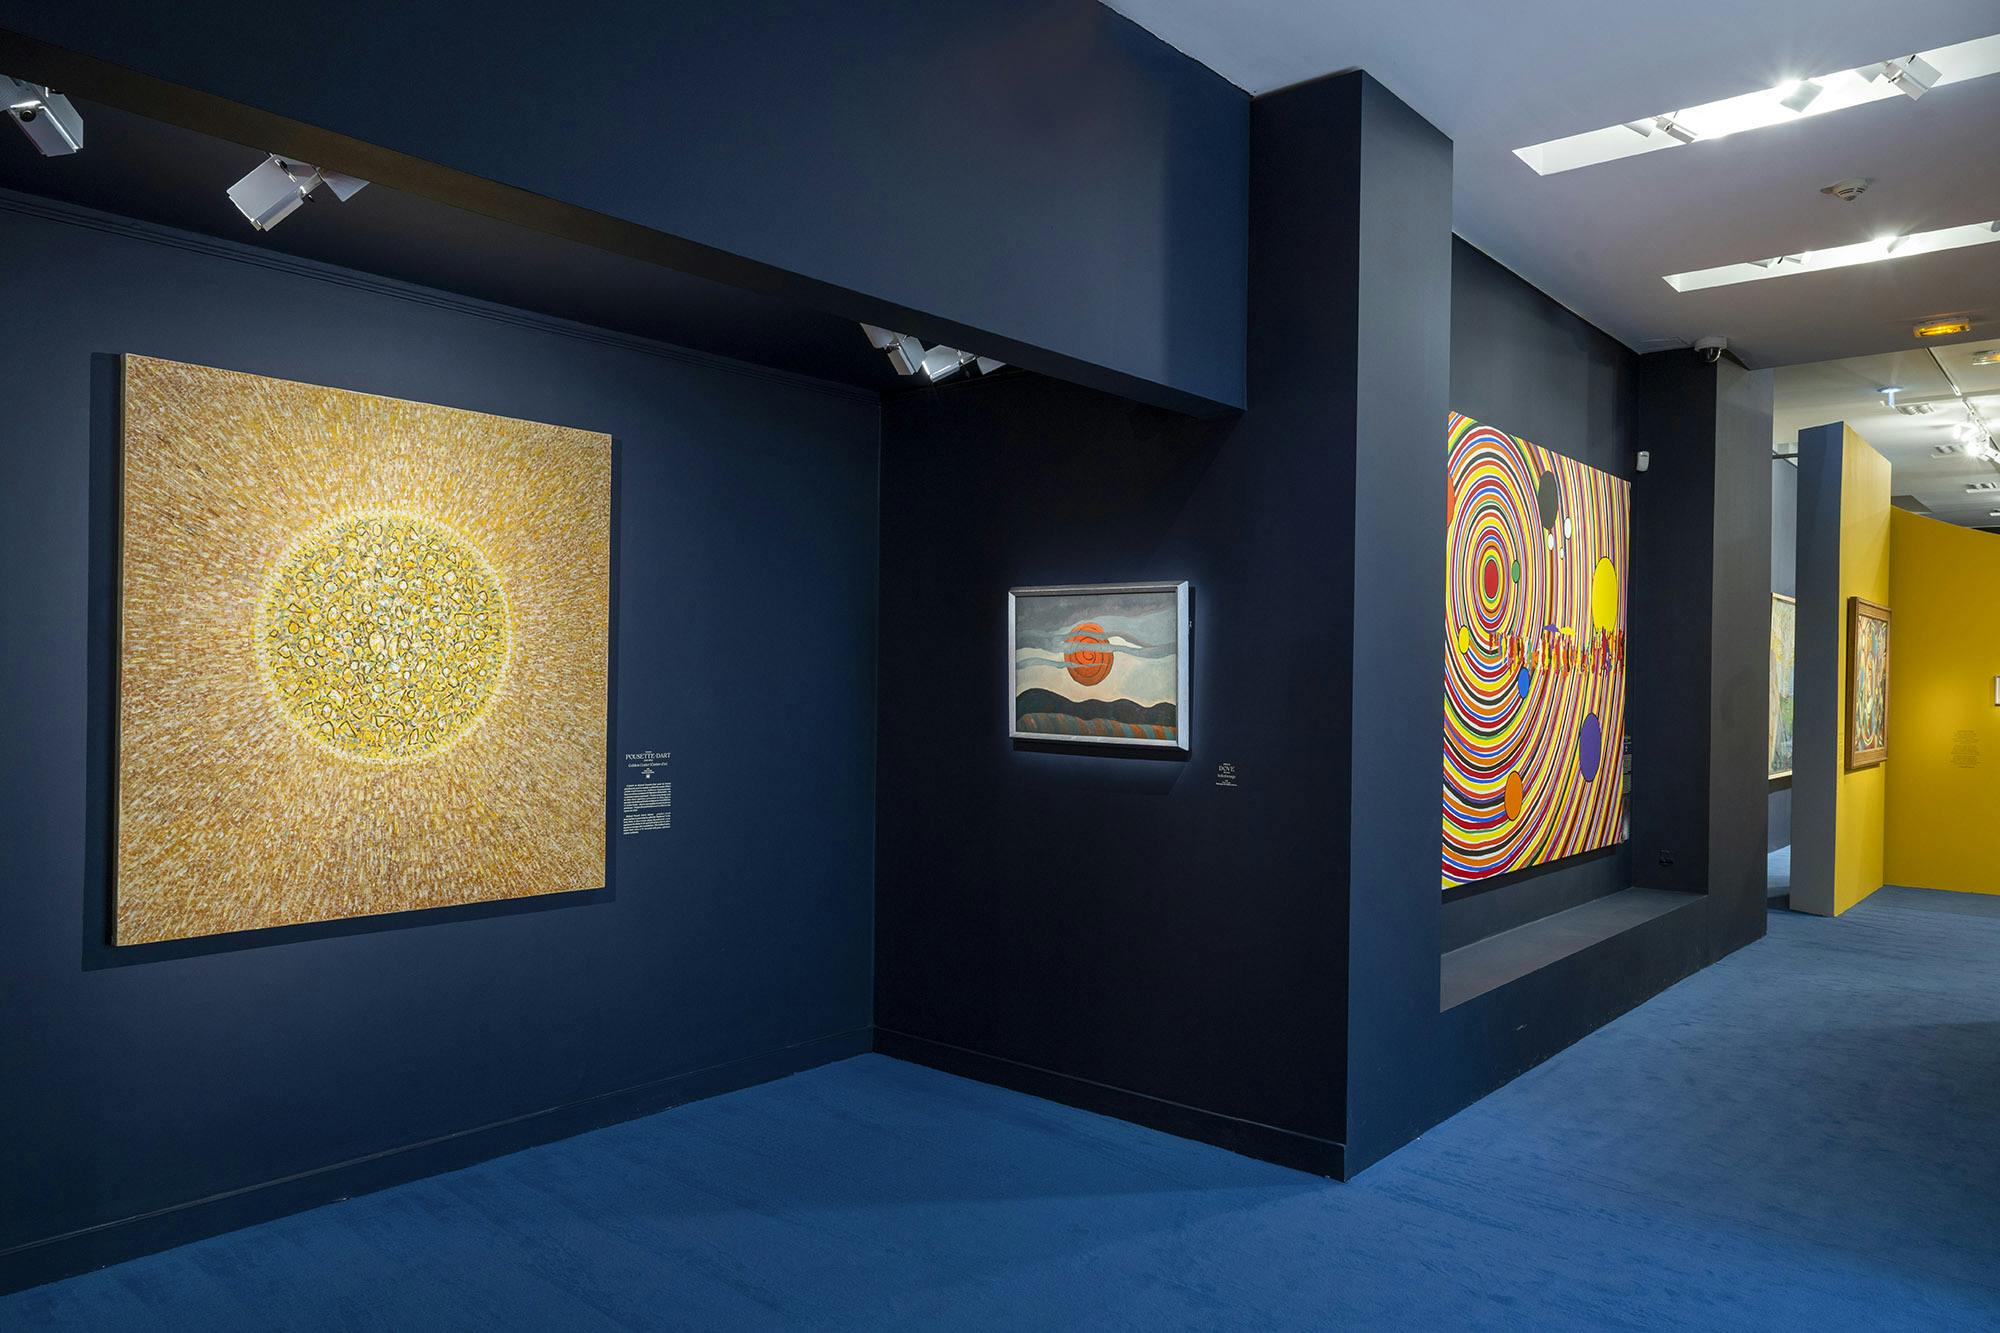 Installation view, Facing the Sun: The Celestial Body in the Arts, Museum Barberini, Potsdam, Germany, 2022. – The Richard Pousette-Dart Foundation